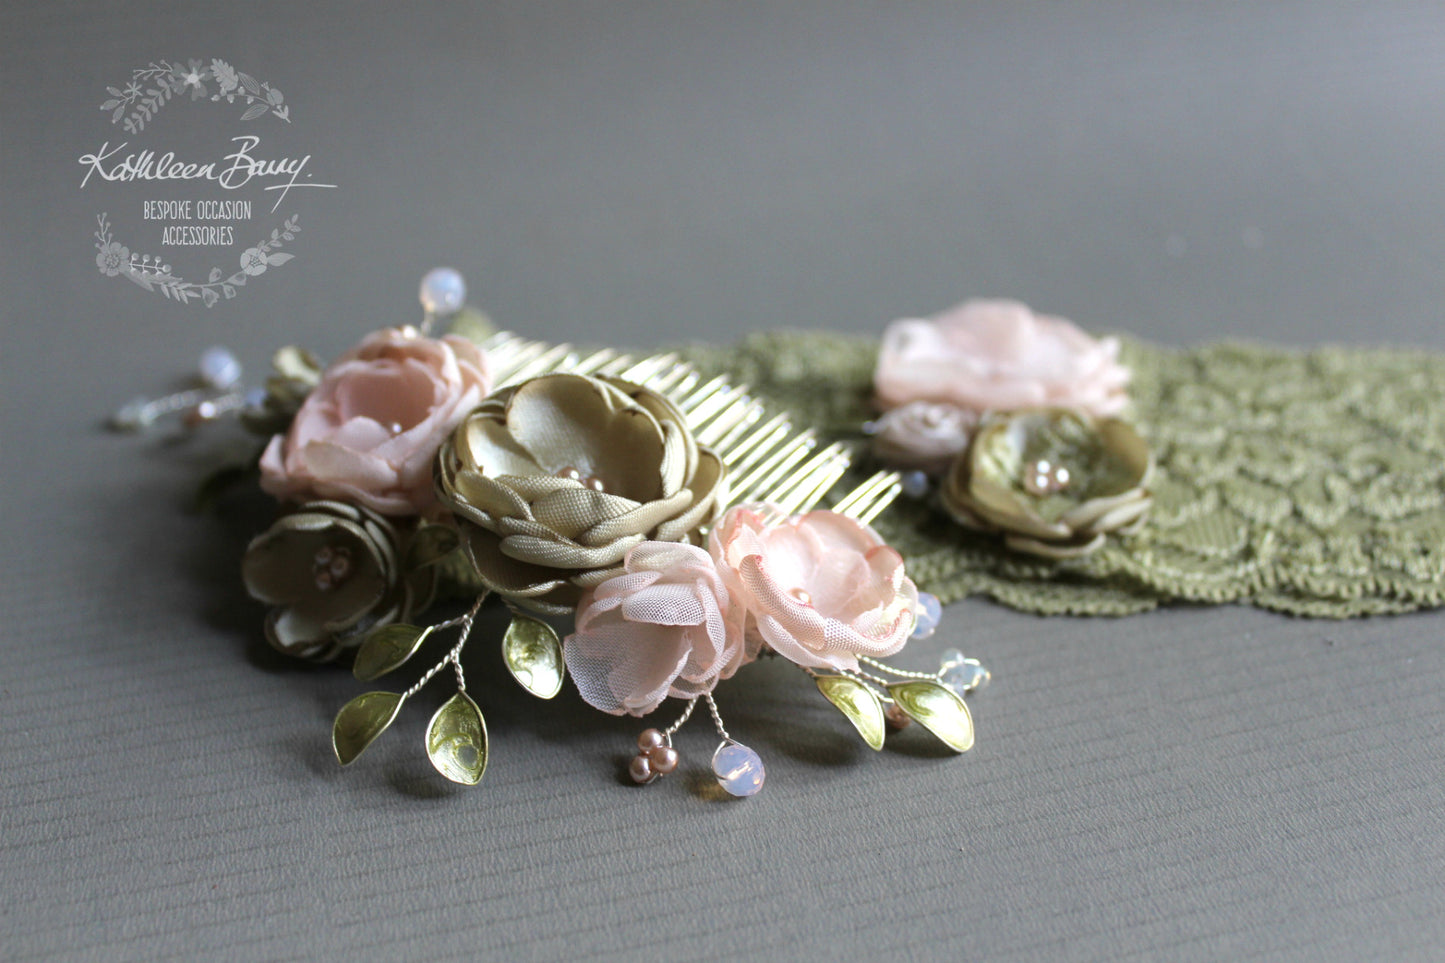 Anique hair comb sage green & blush pink flower detail - Custom colors to order